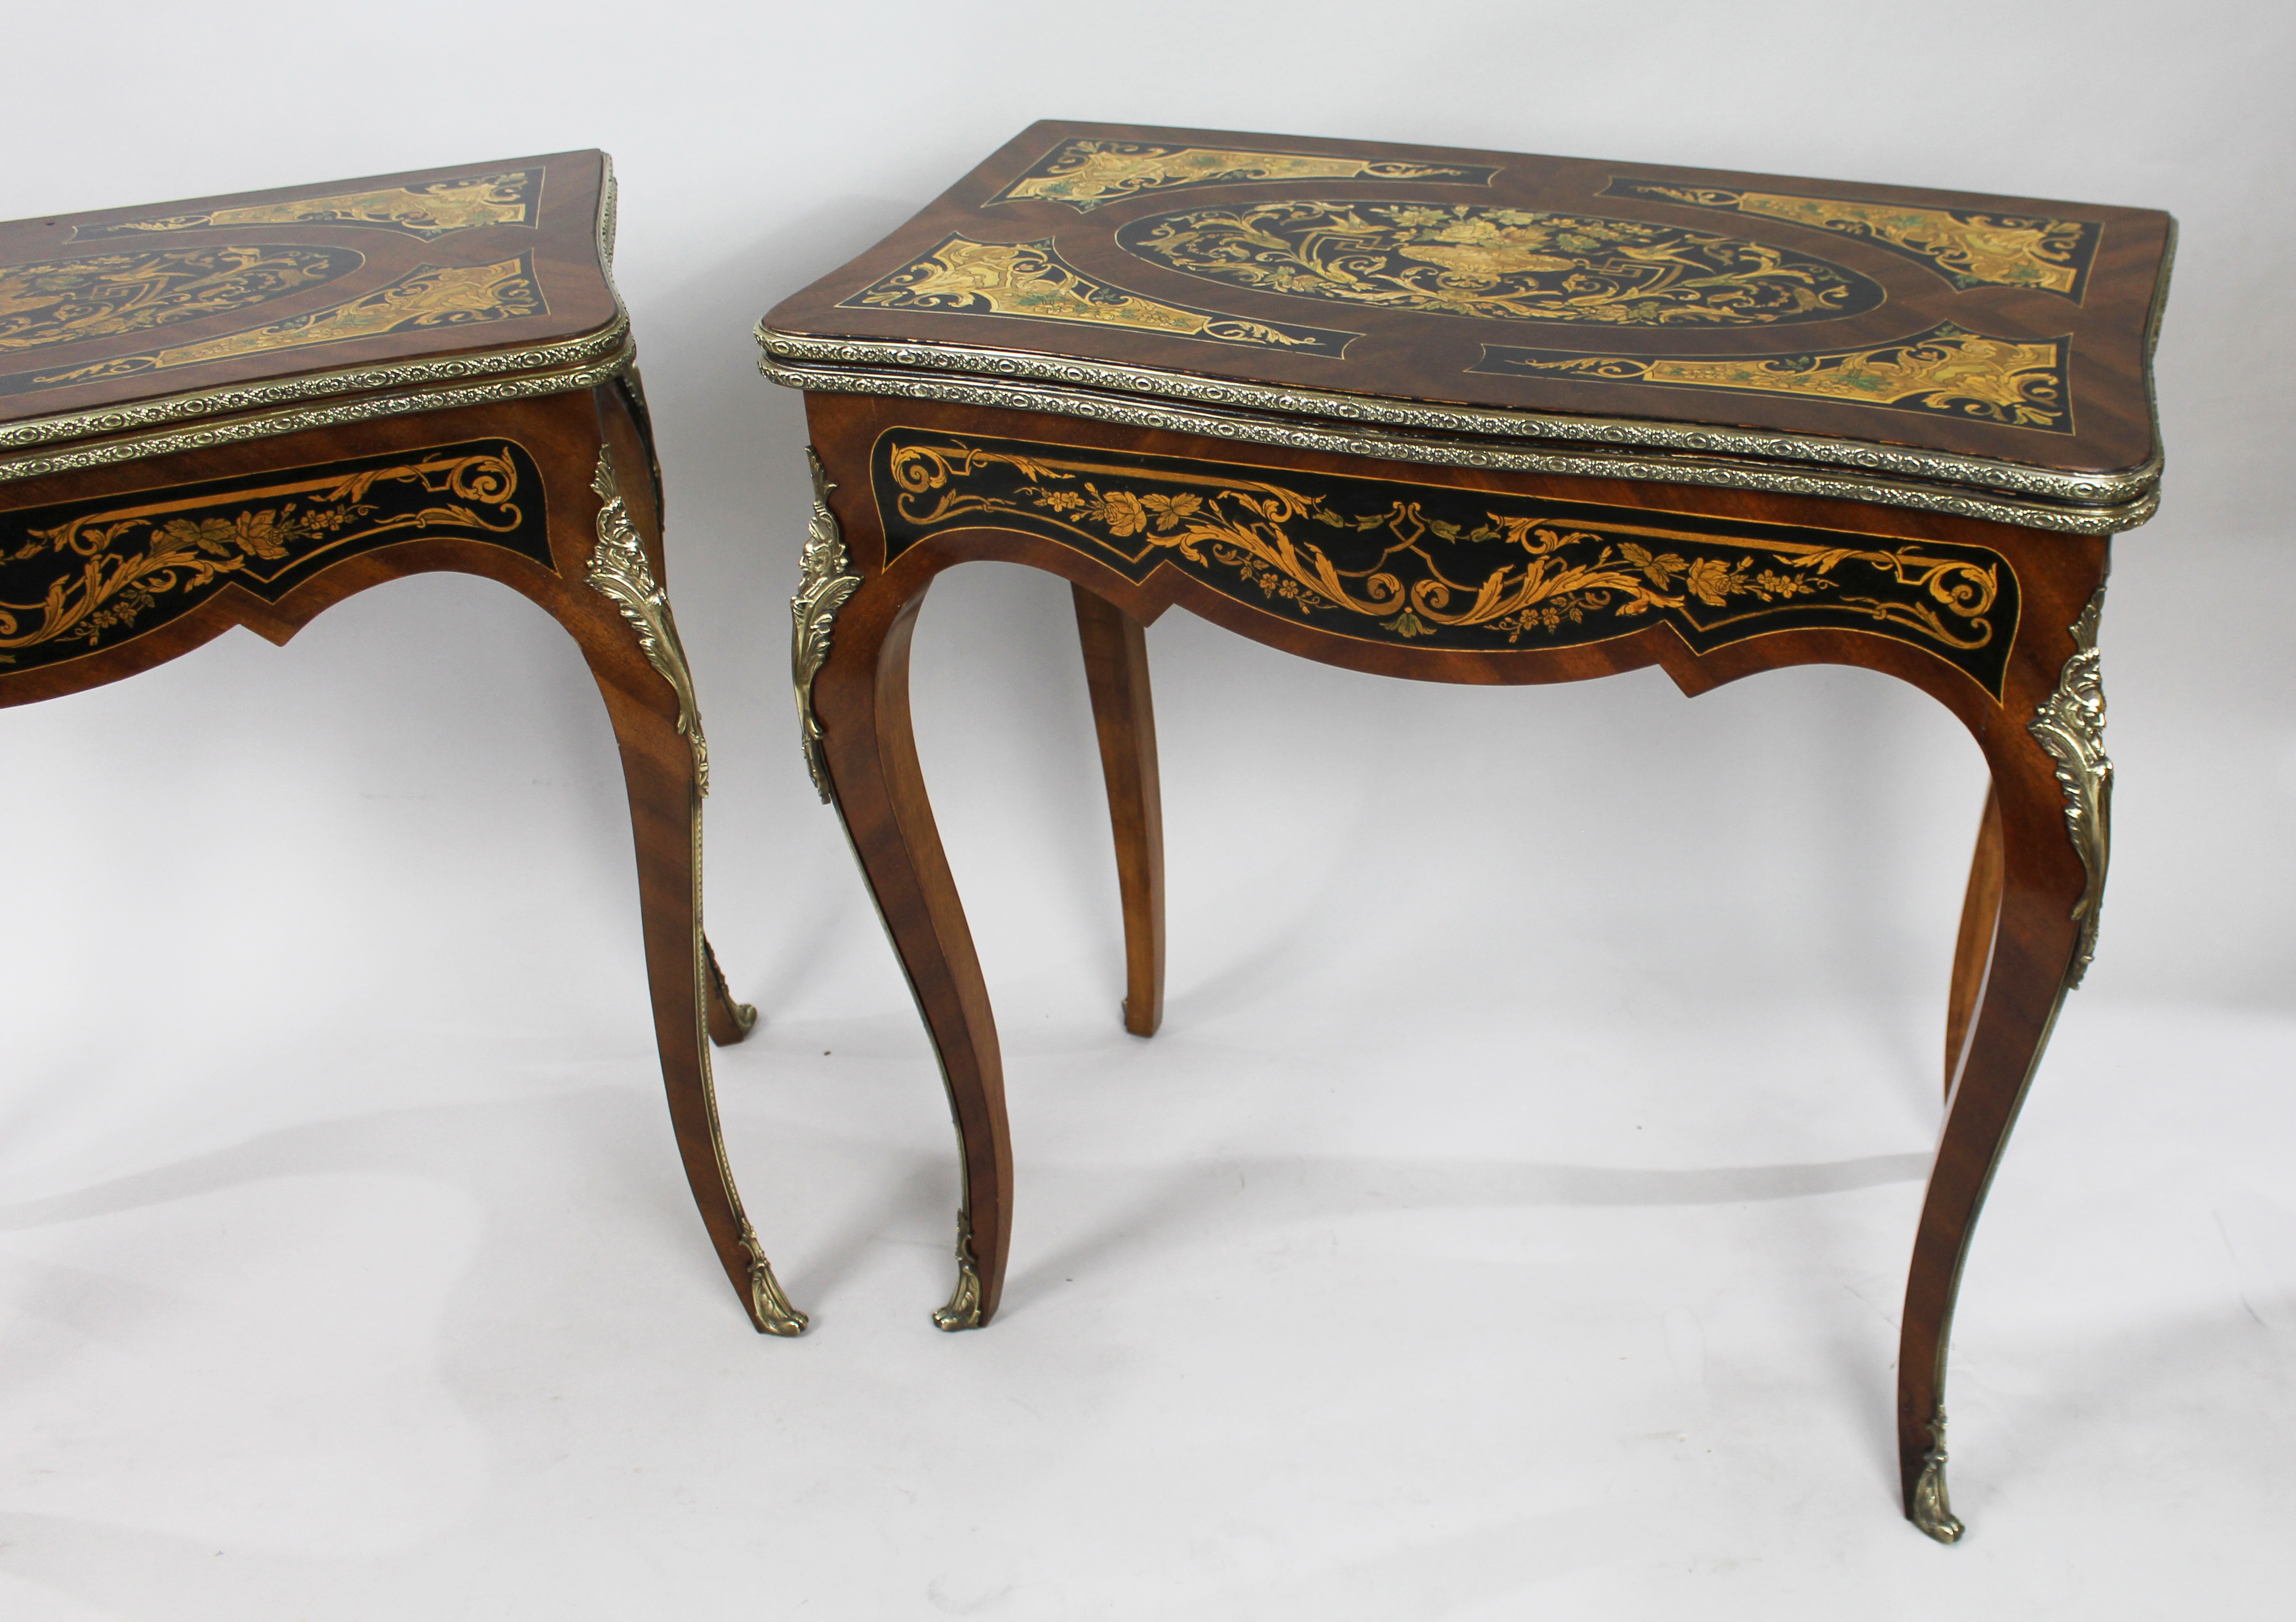 Pair of Marquetry Inlaid 19th c. Card Tables - Image 4 of 7